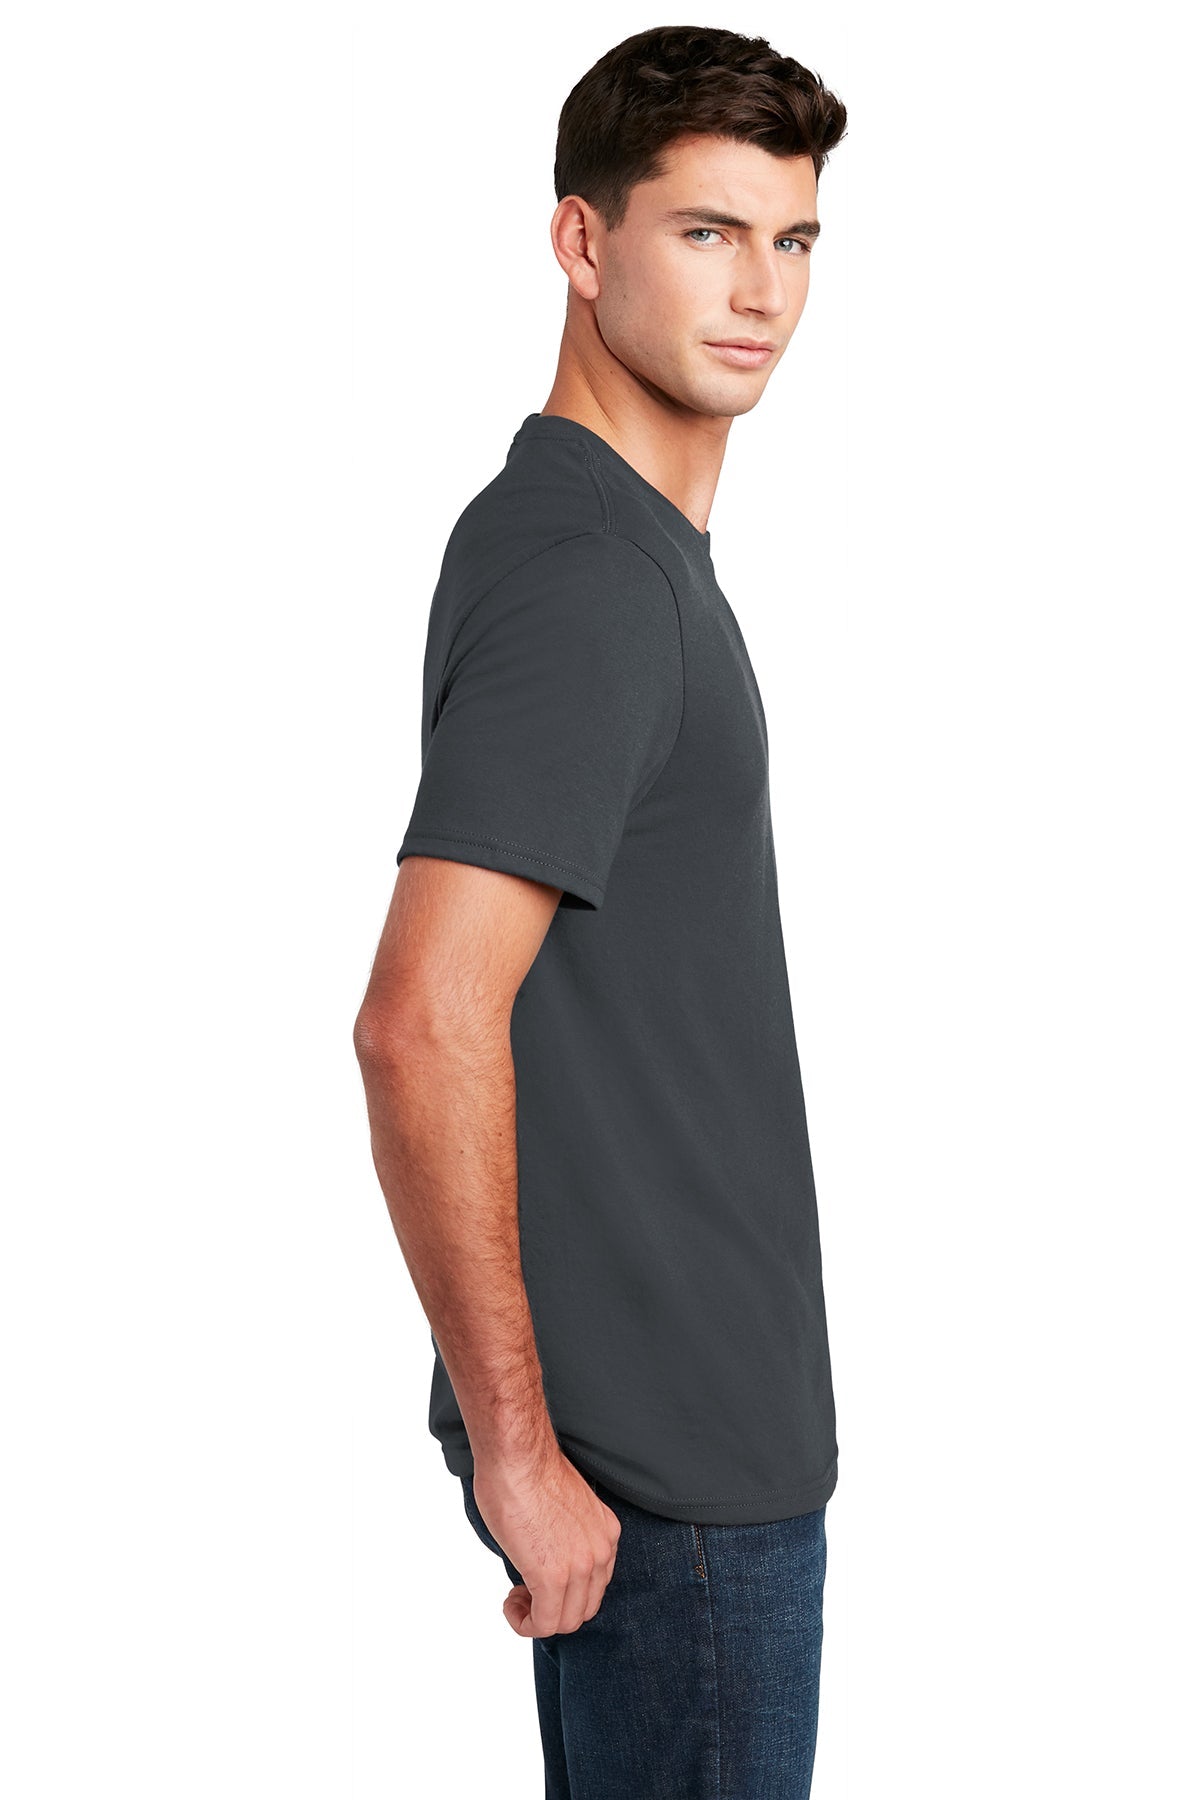 District Made Mens Perfect Blend Tee's, Charcoal